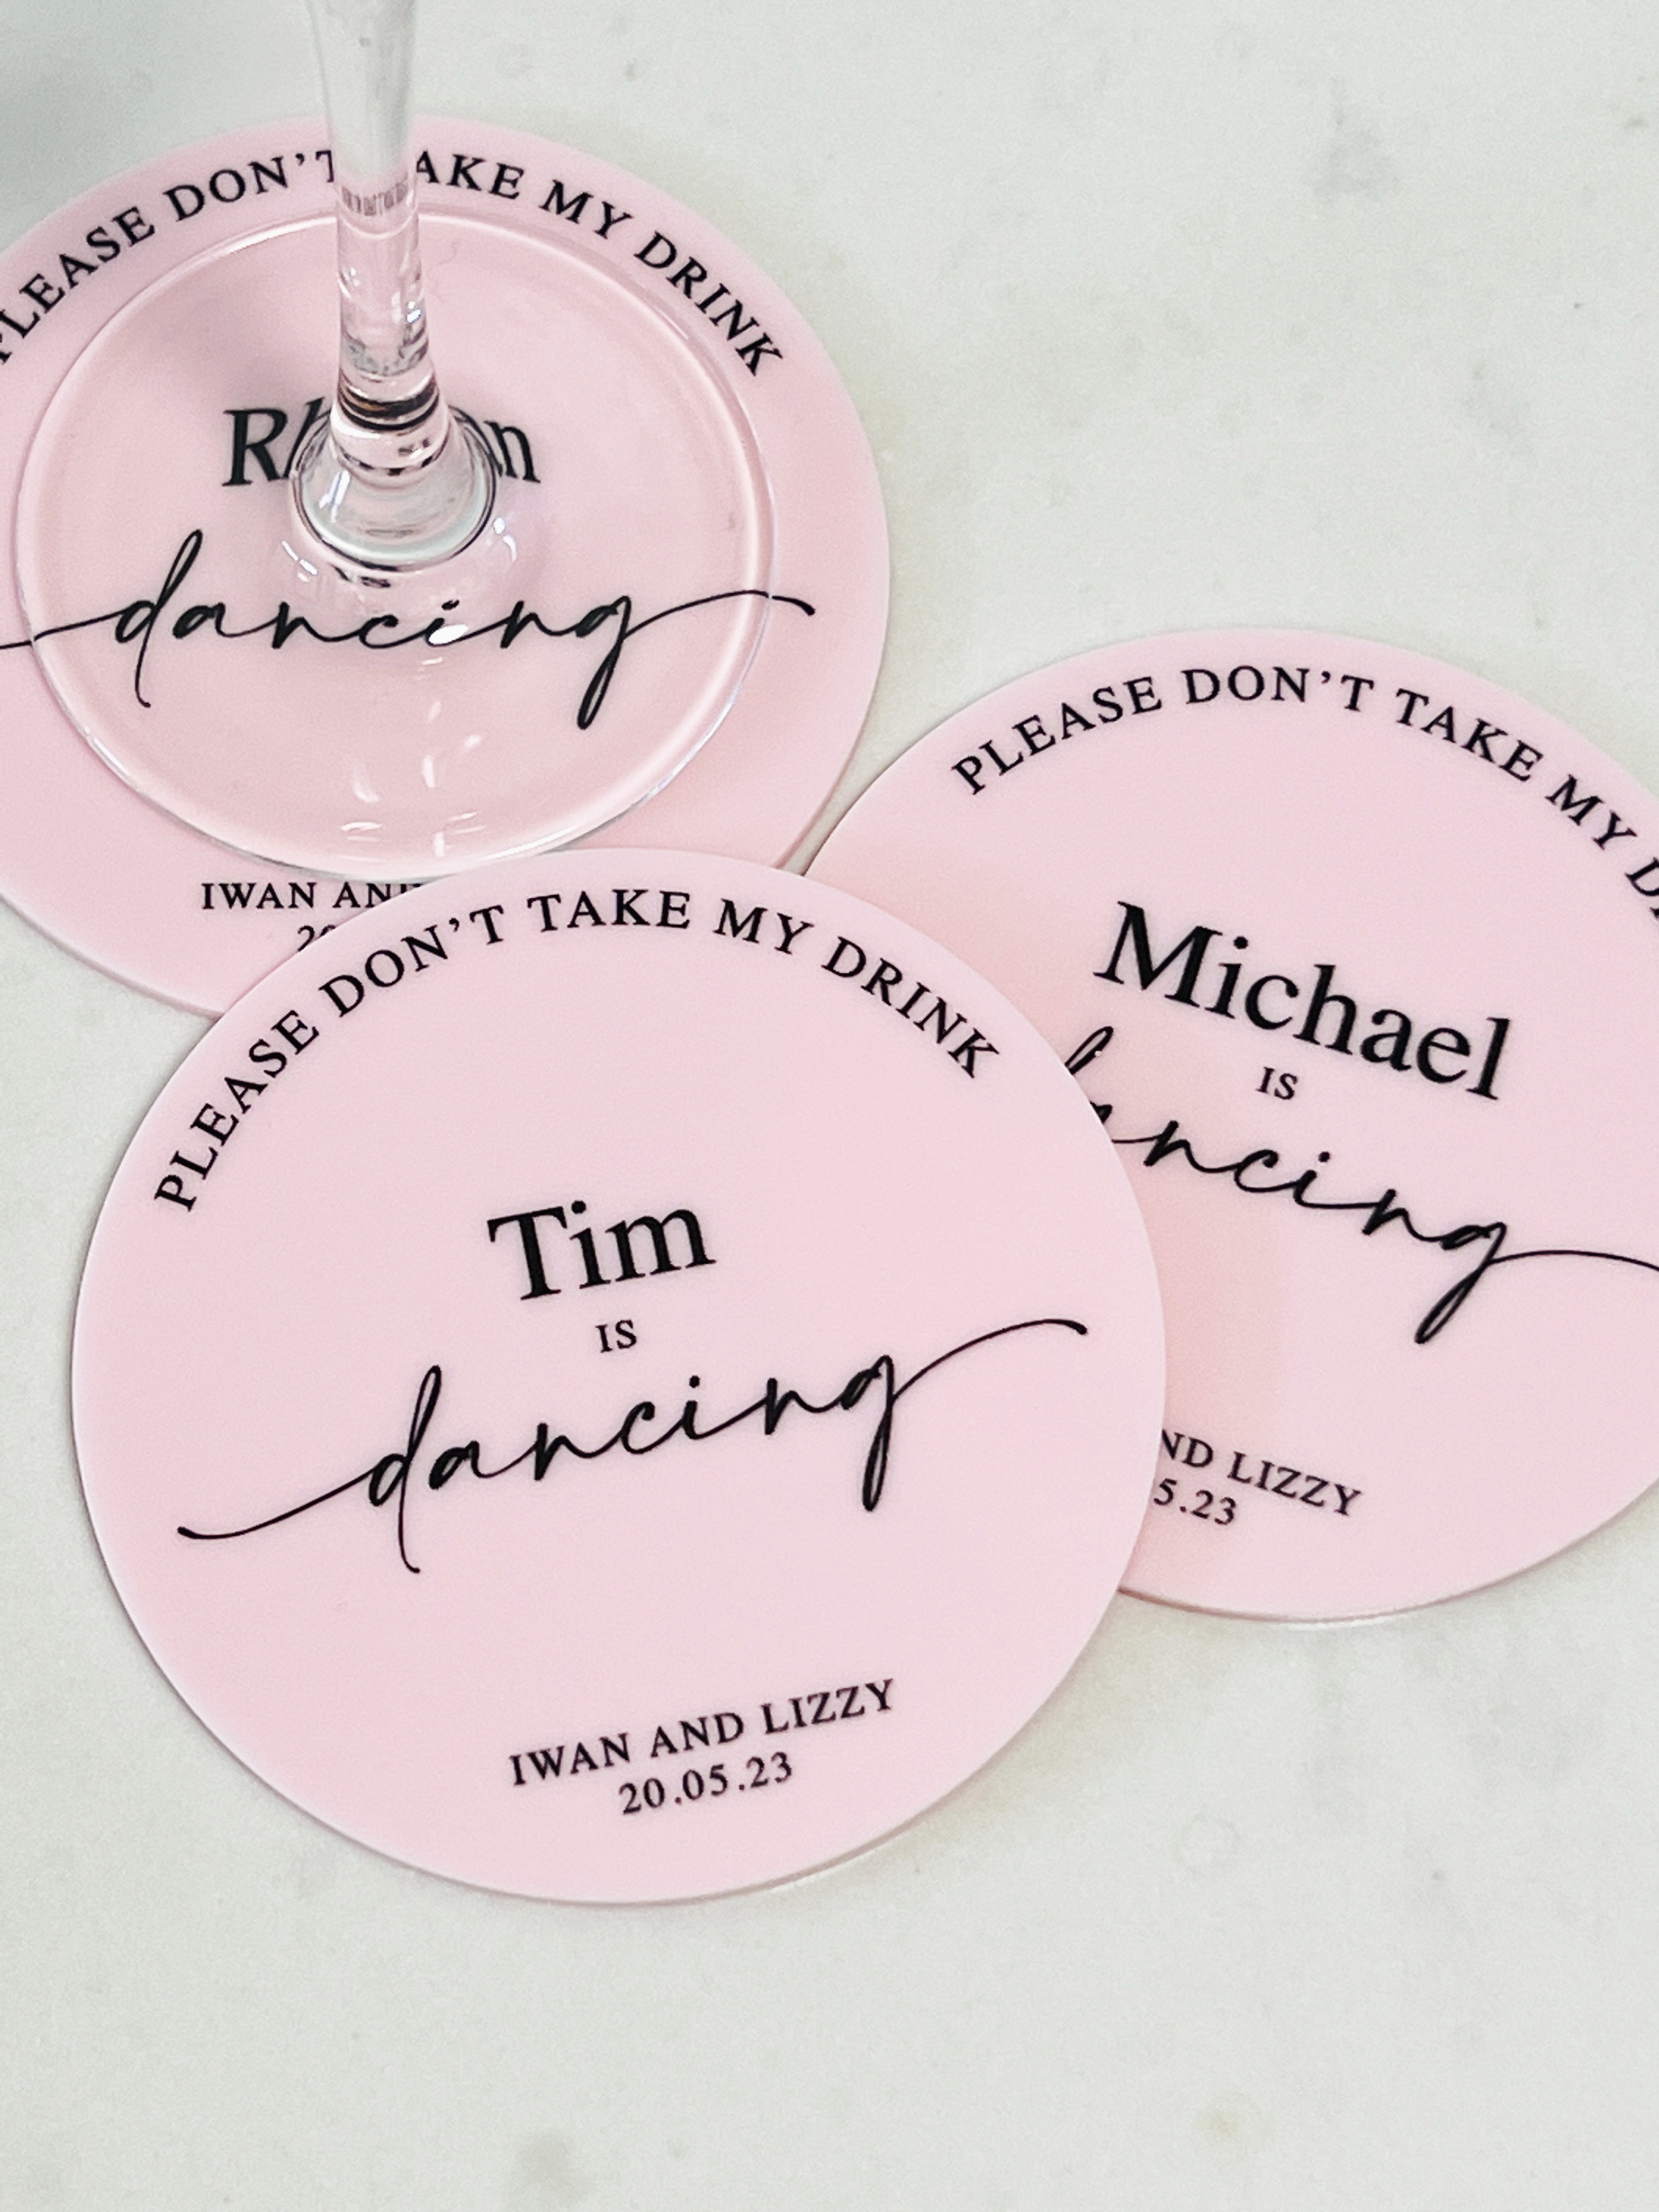 Don't Take My Drink I'm Dancing Coasters